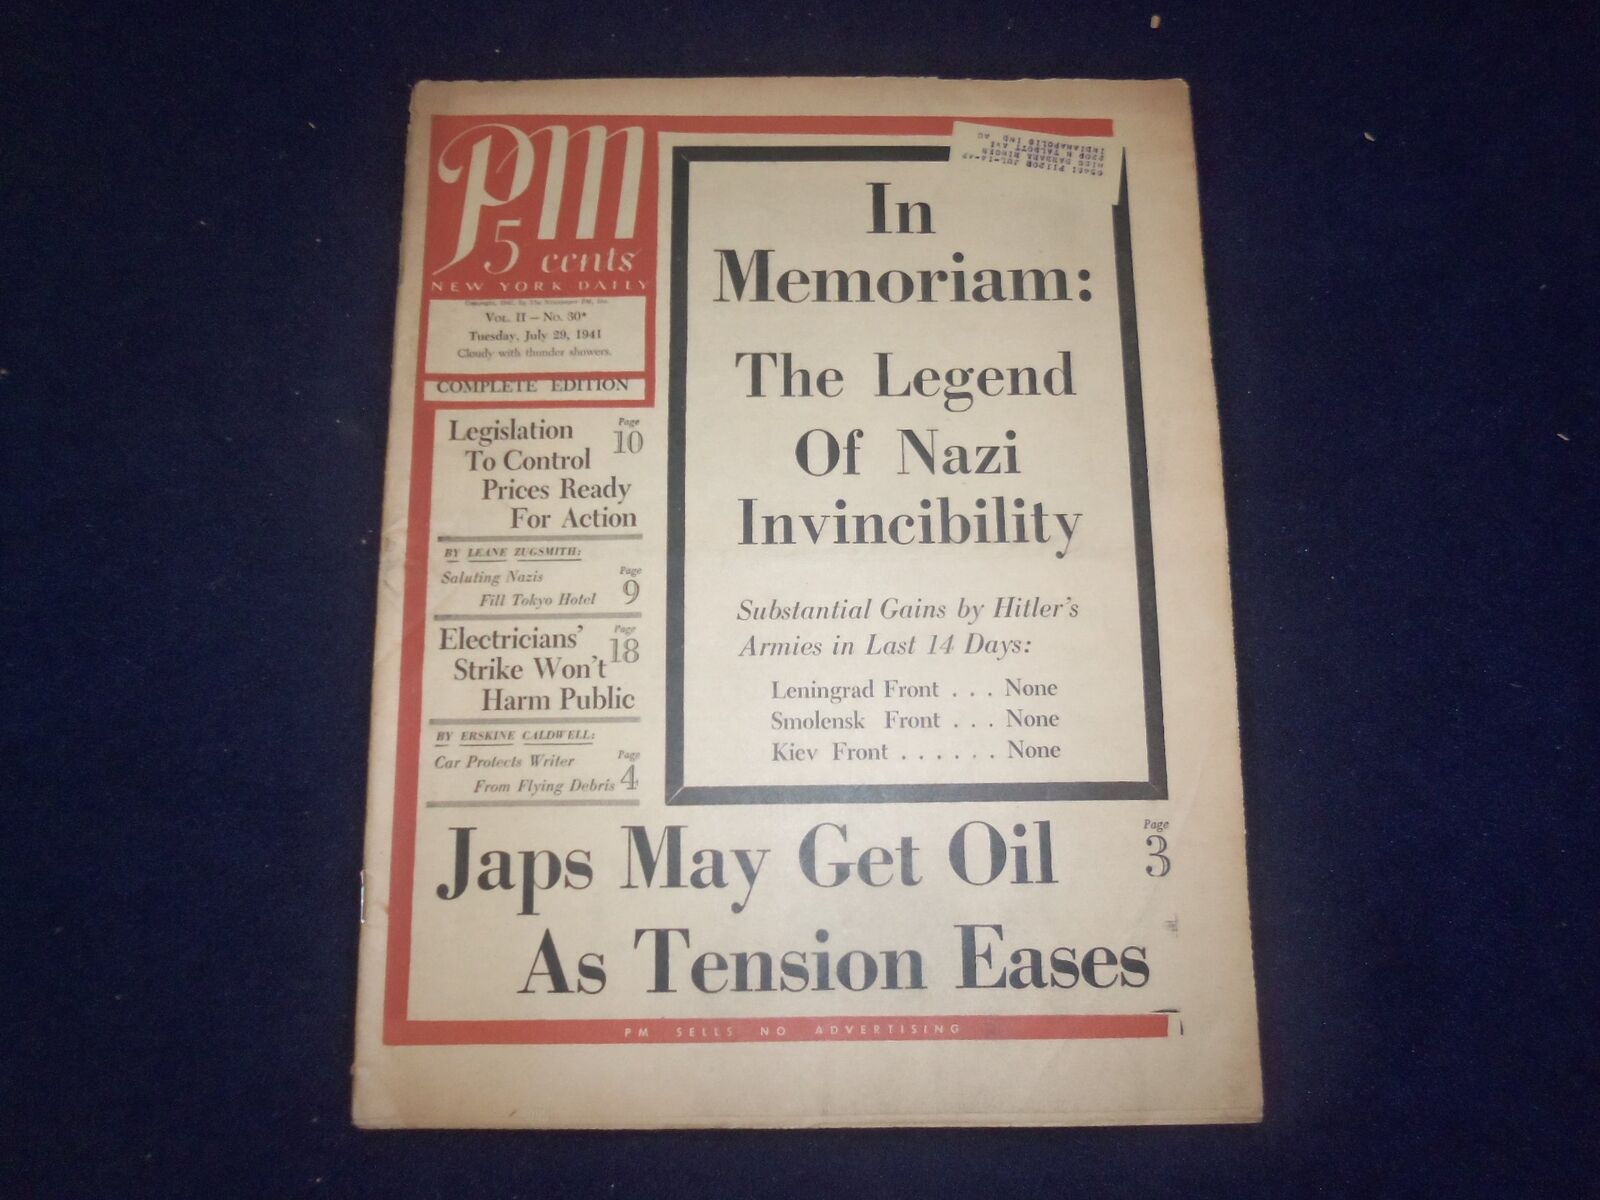 1941 JULY 29 PM'S WEEKLY NEWSPAPER - THE LEGEND OF NAZI INVINCIBILITY - NP 7287